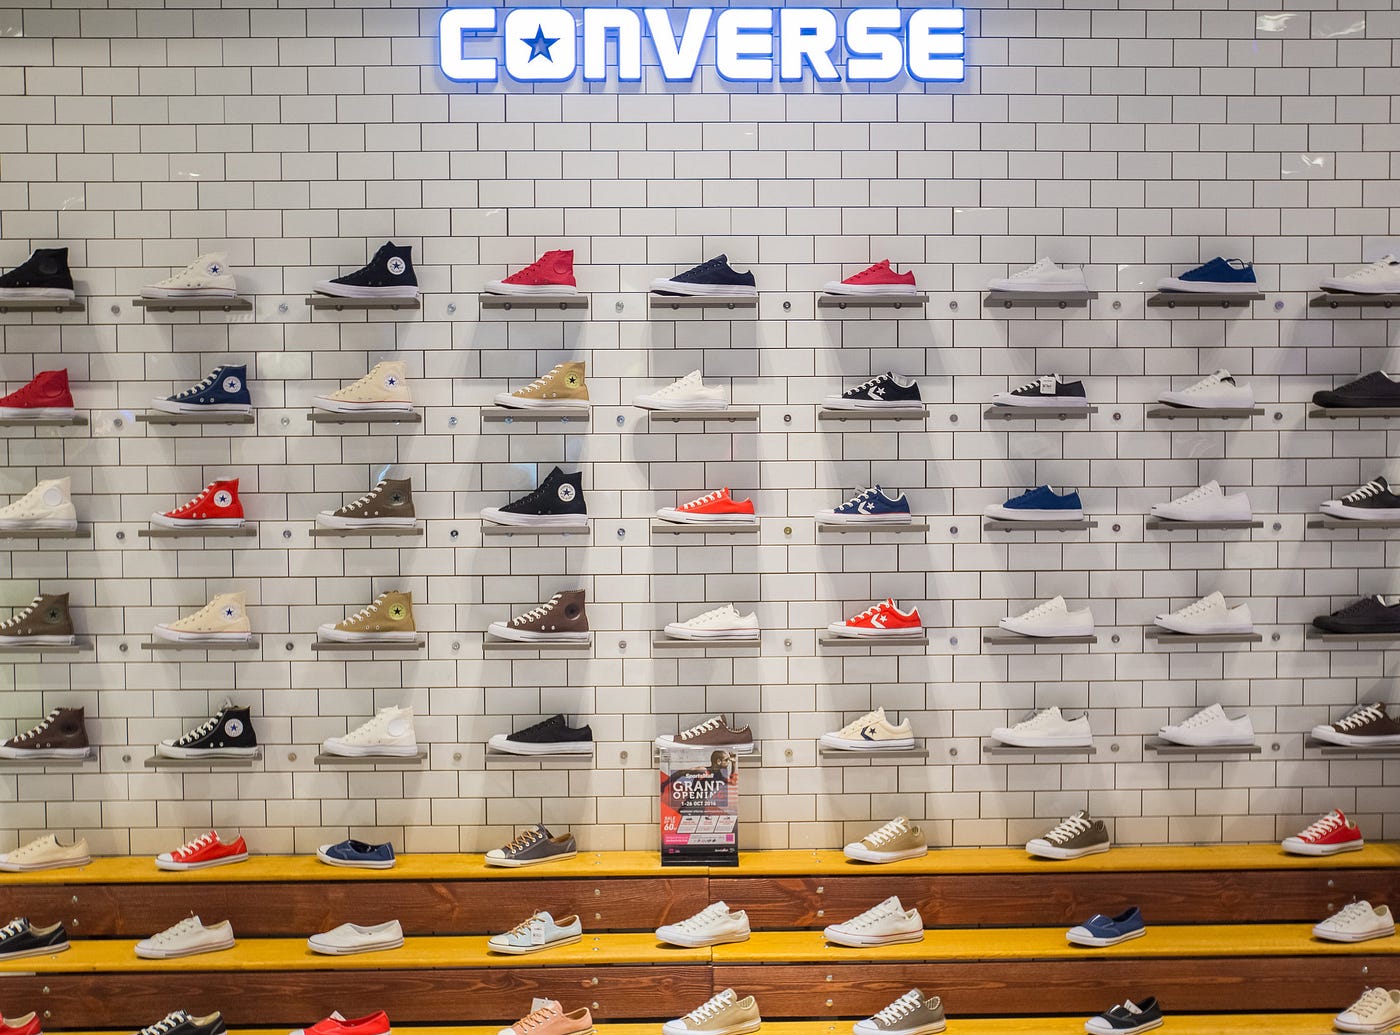 19 Insider for Money on Converse Shoes by Koopy | Medium